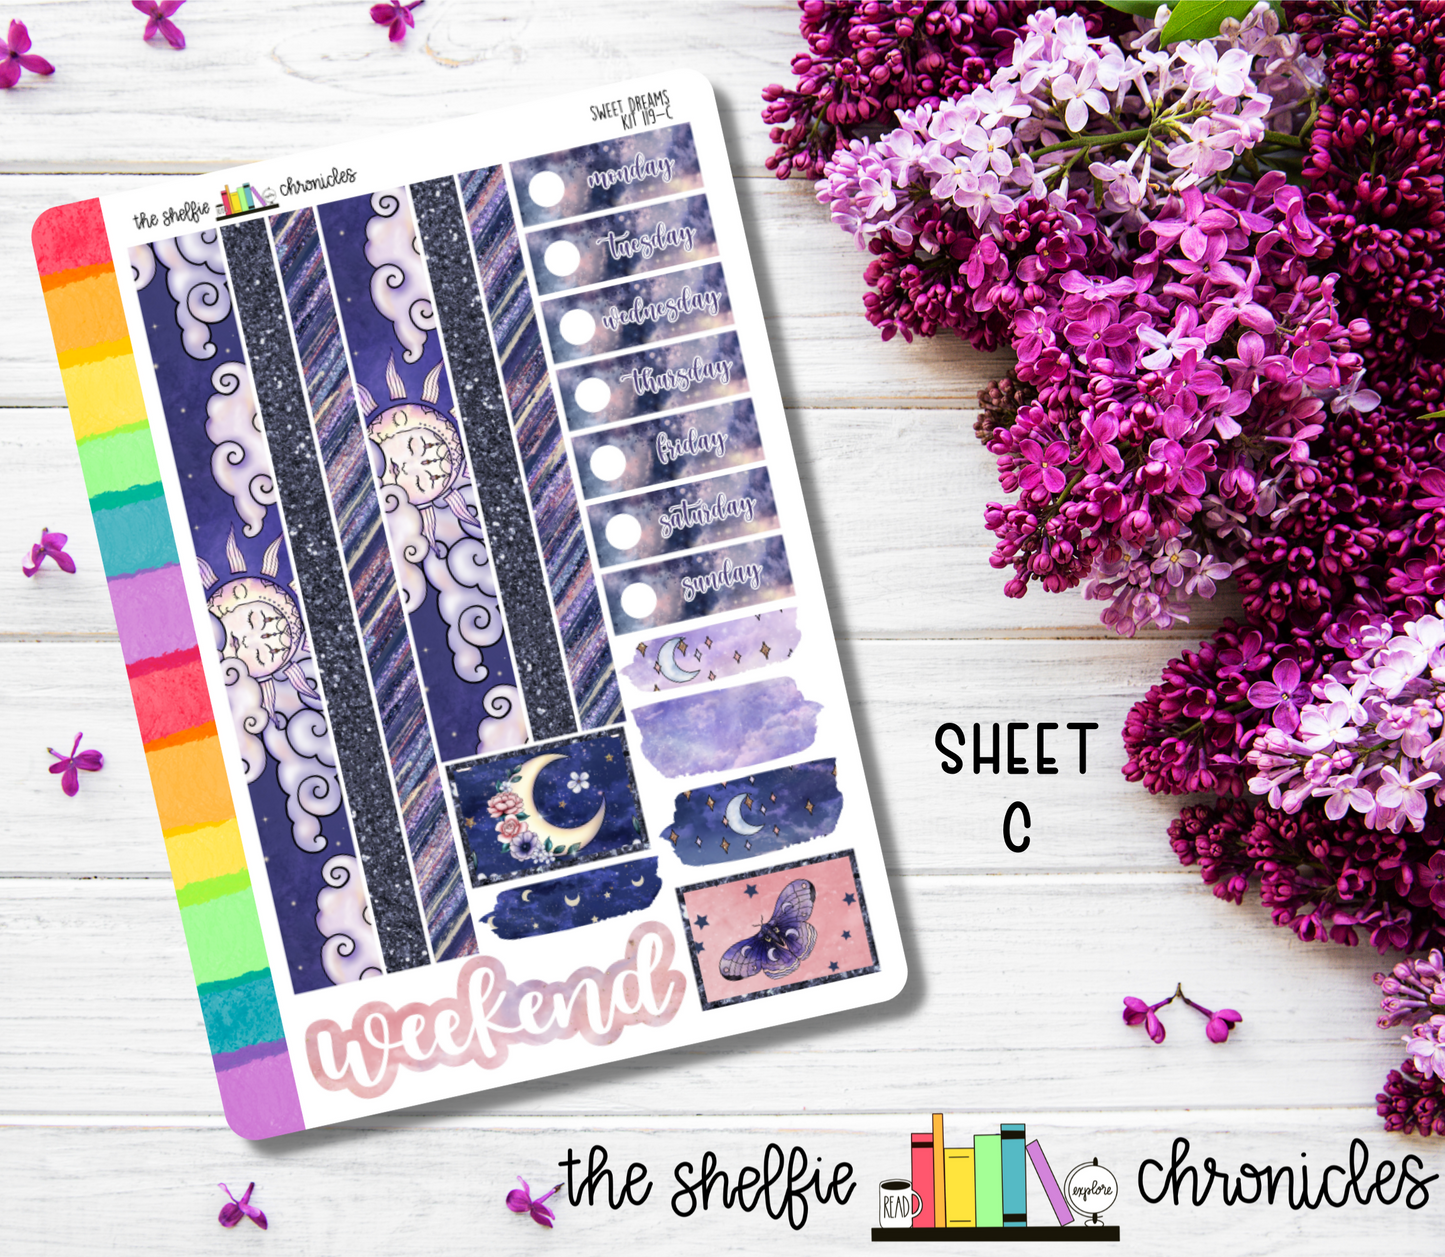 Kit 119 - Sweet Dreams Weekly Kit - Die Cut Stickers - Repositionable Paper - Made To Fit 7x9 Planners